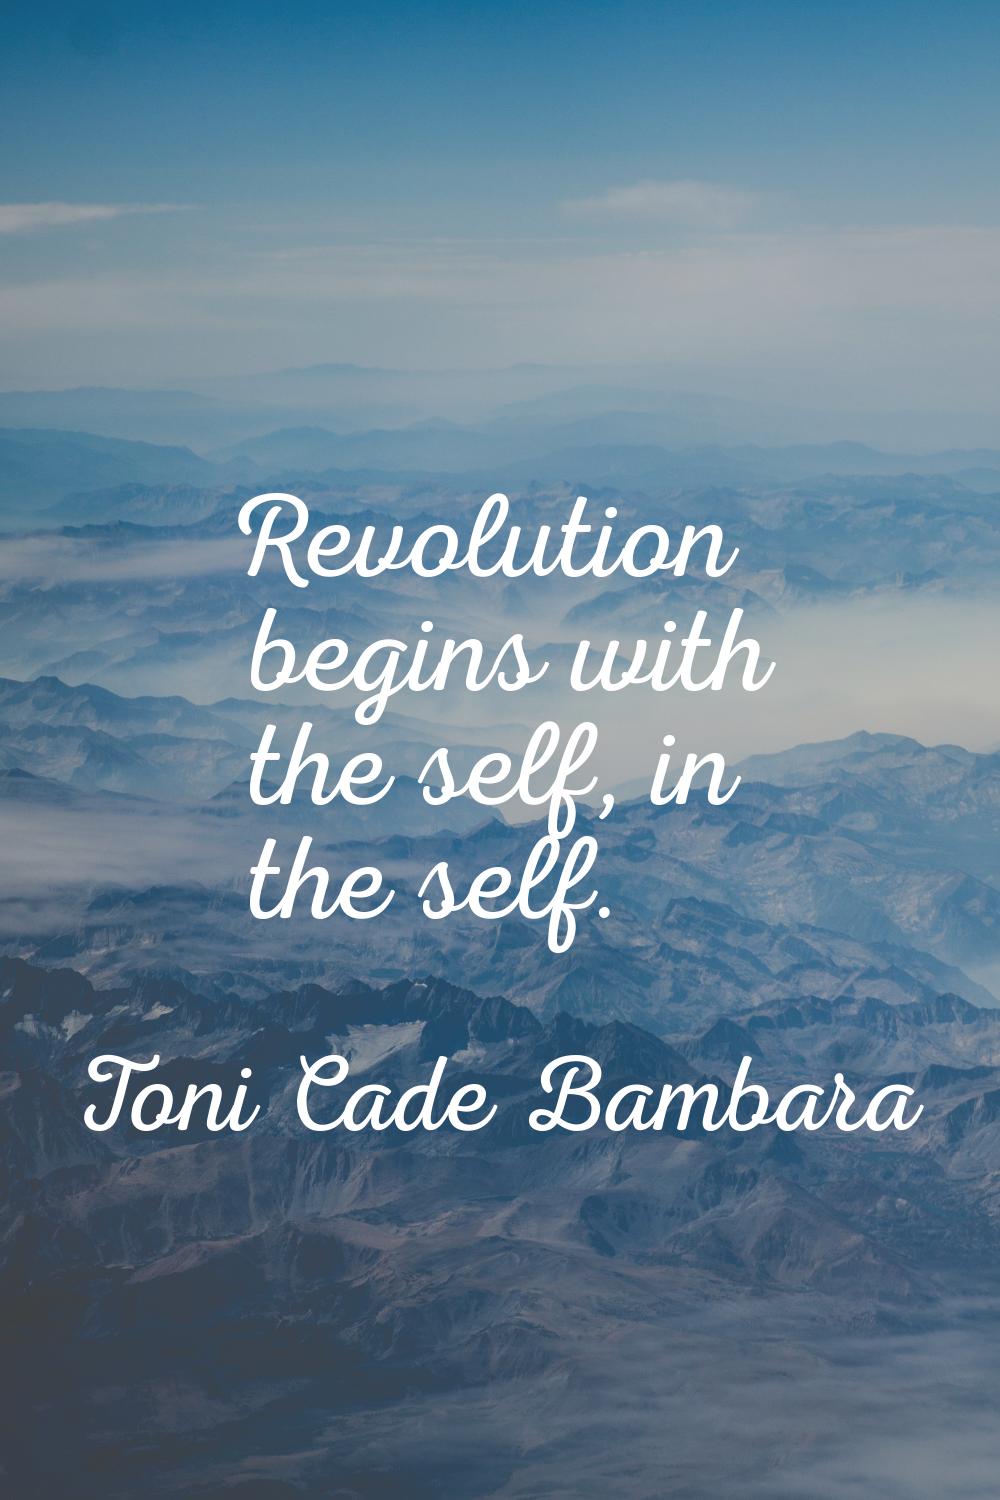 Revolution begins with the self, in the self.